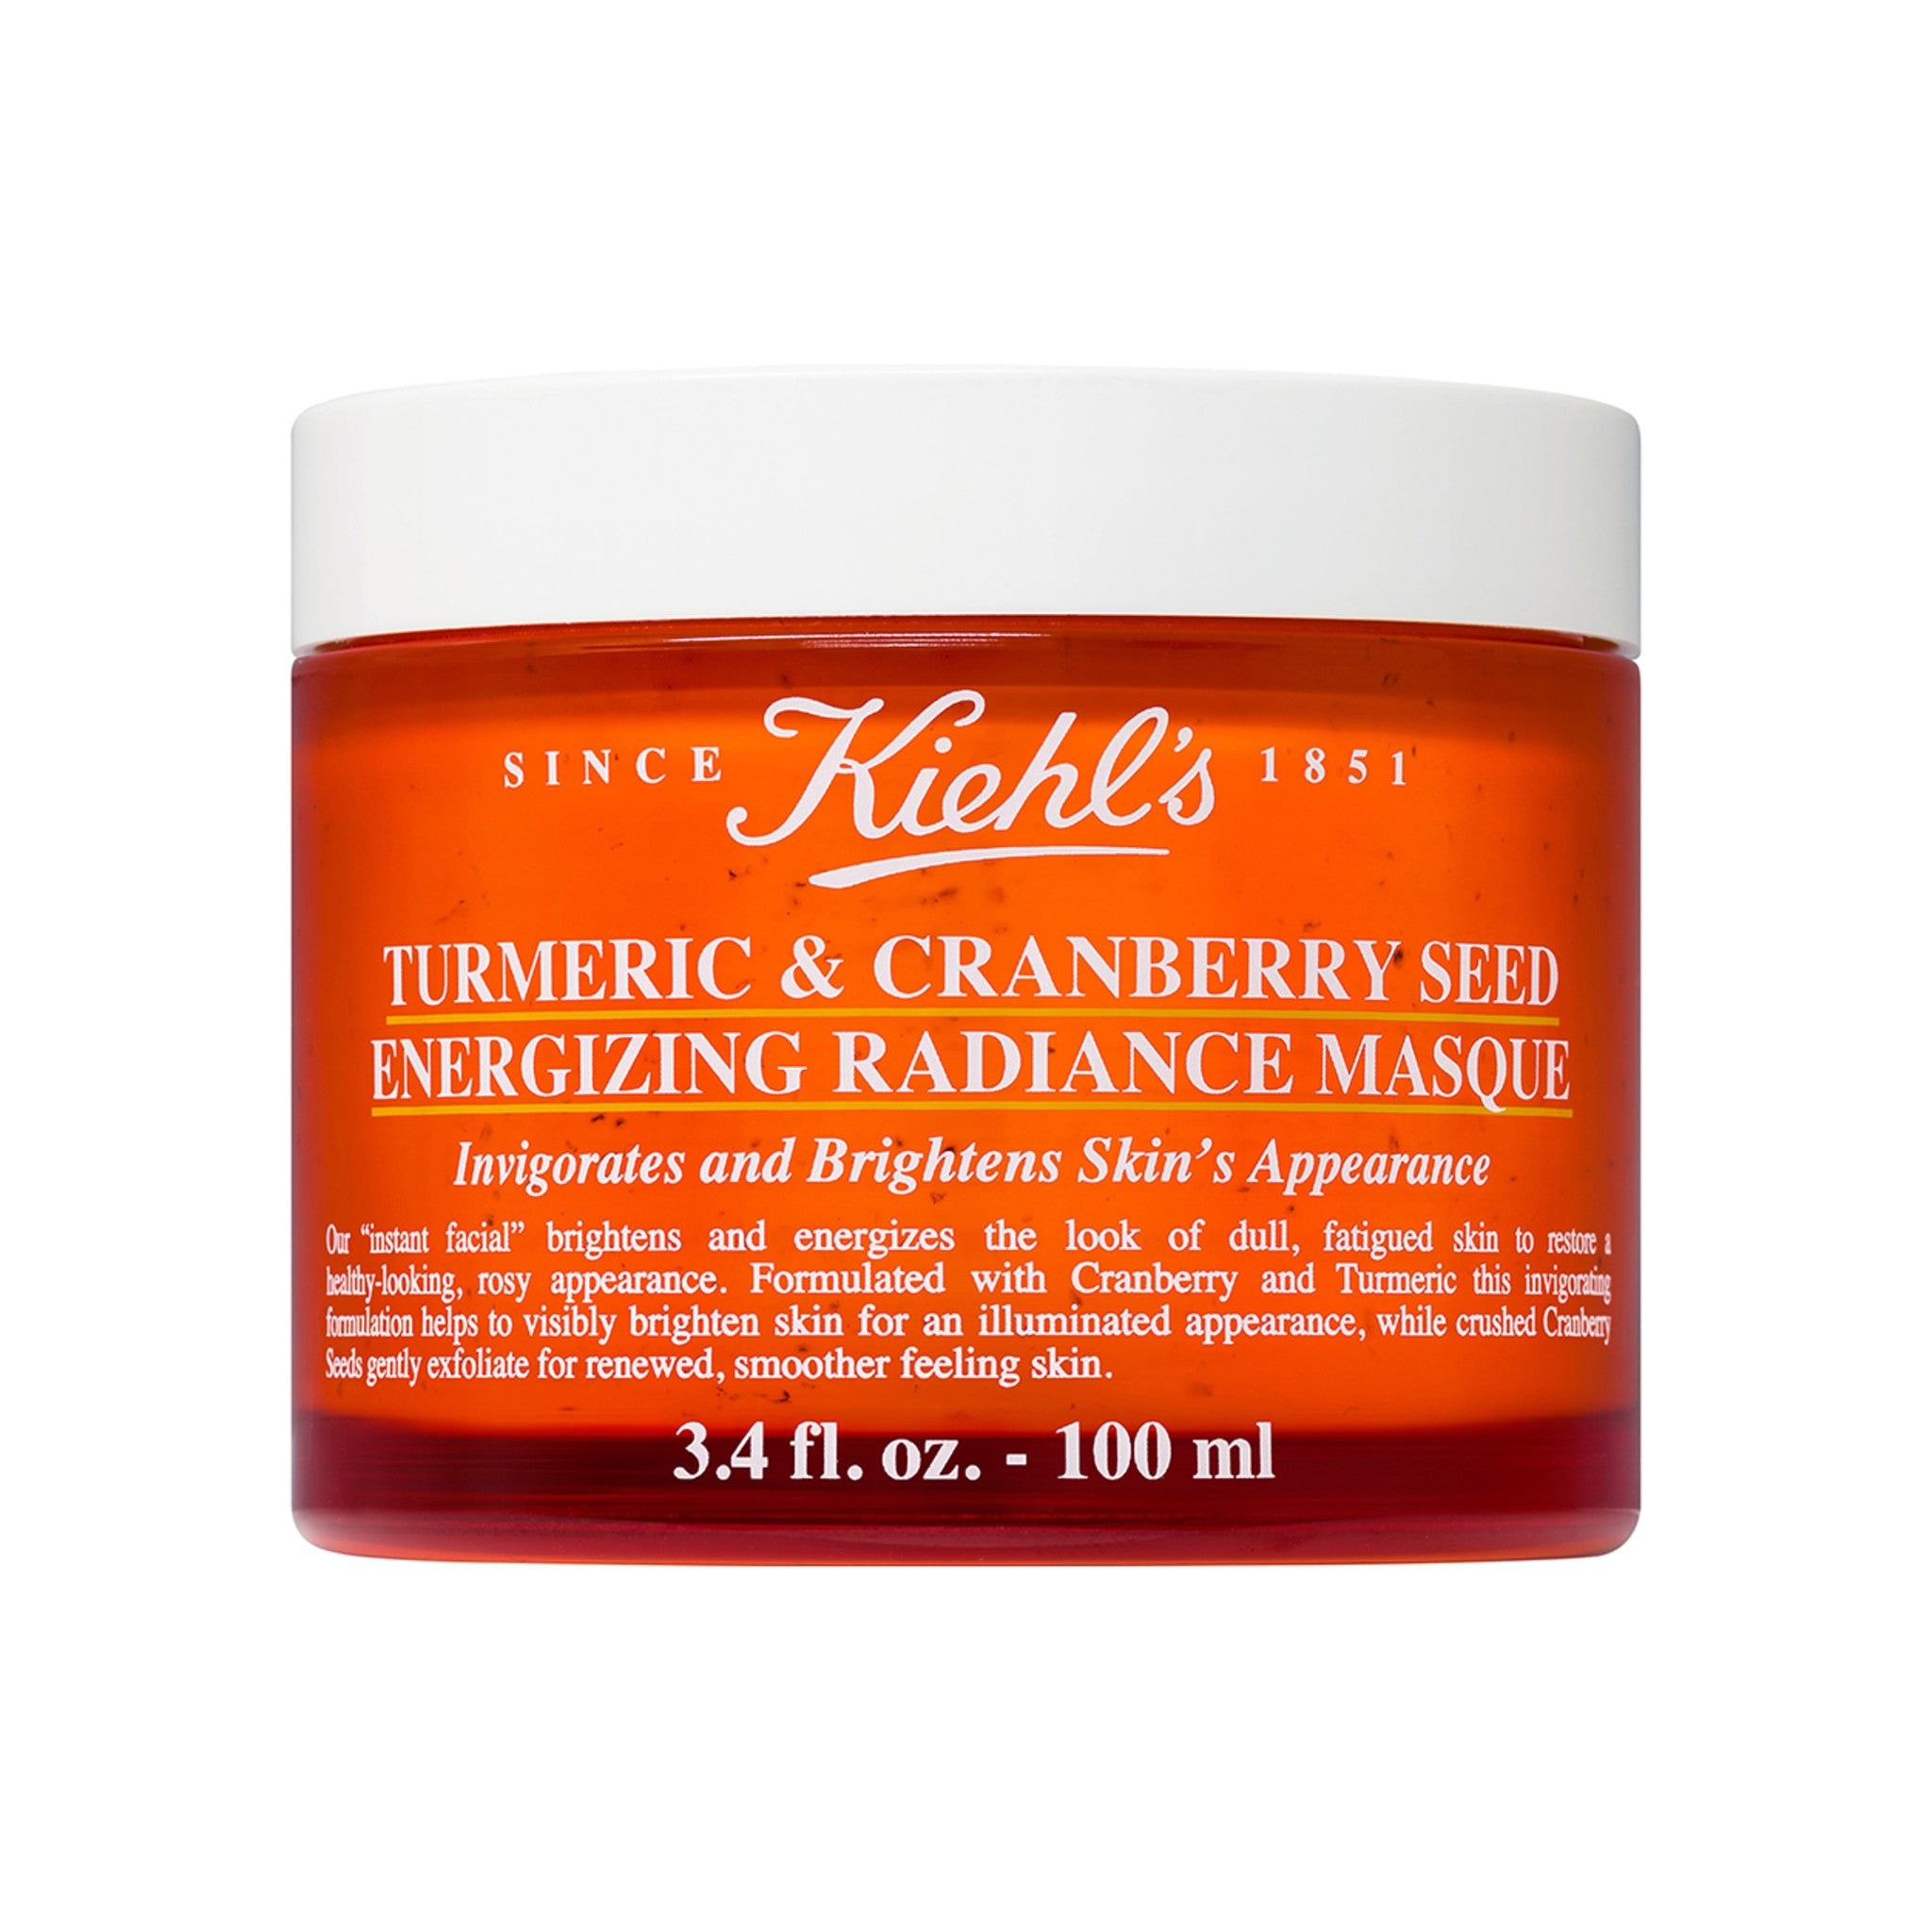 Kiehl's Since 1851 Turmeric and Cranberry Seed Energizing Radiance Masque Size variant: 3.4 oz. main image.